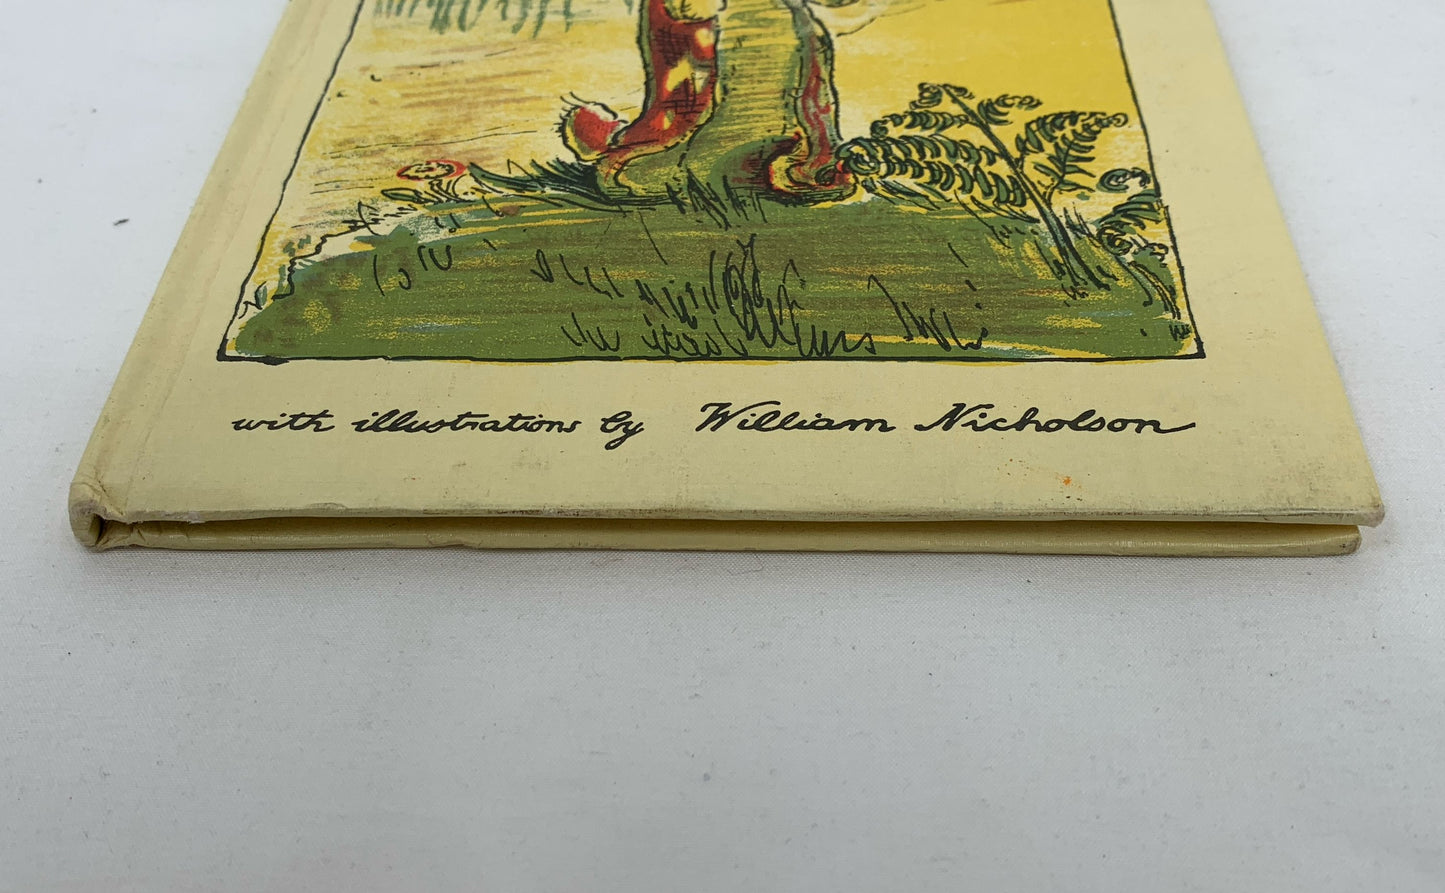 Vintage The Velveteen Rabbit By Margery Williams With Illustrations